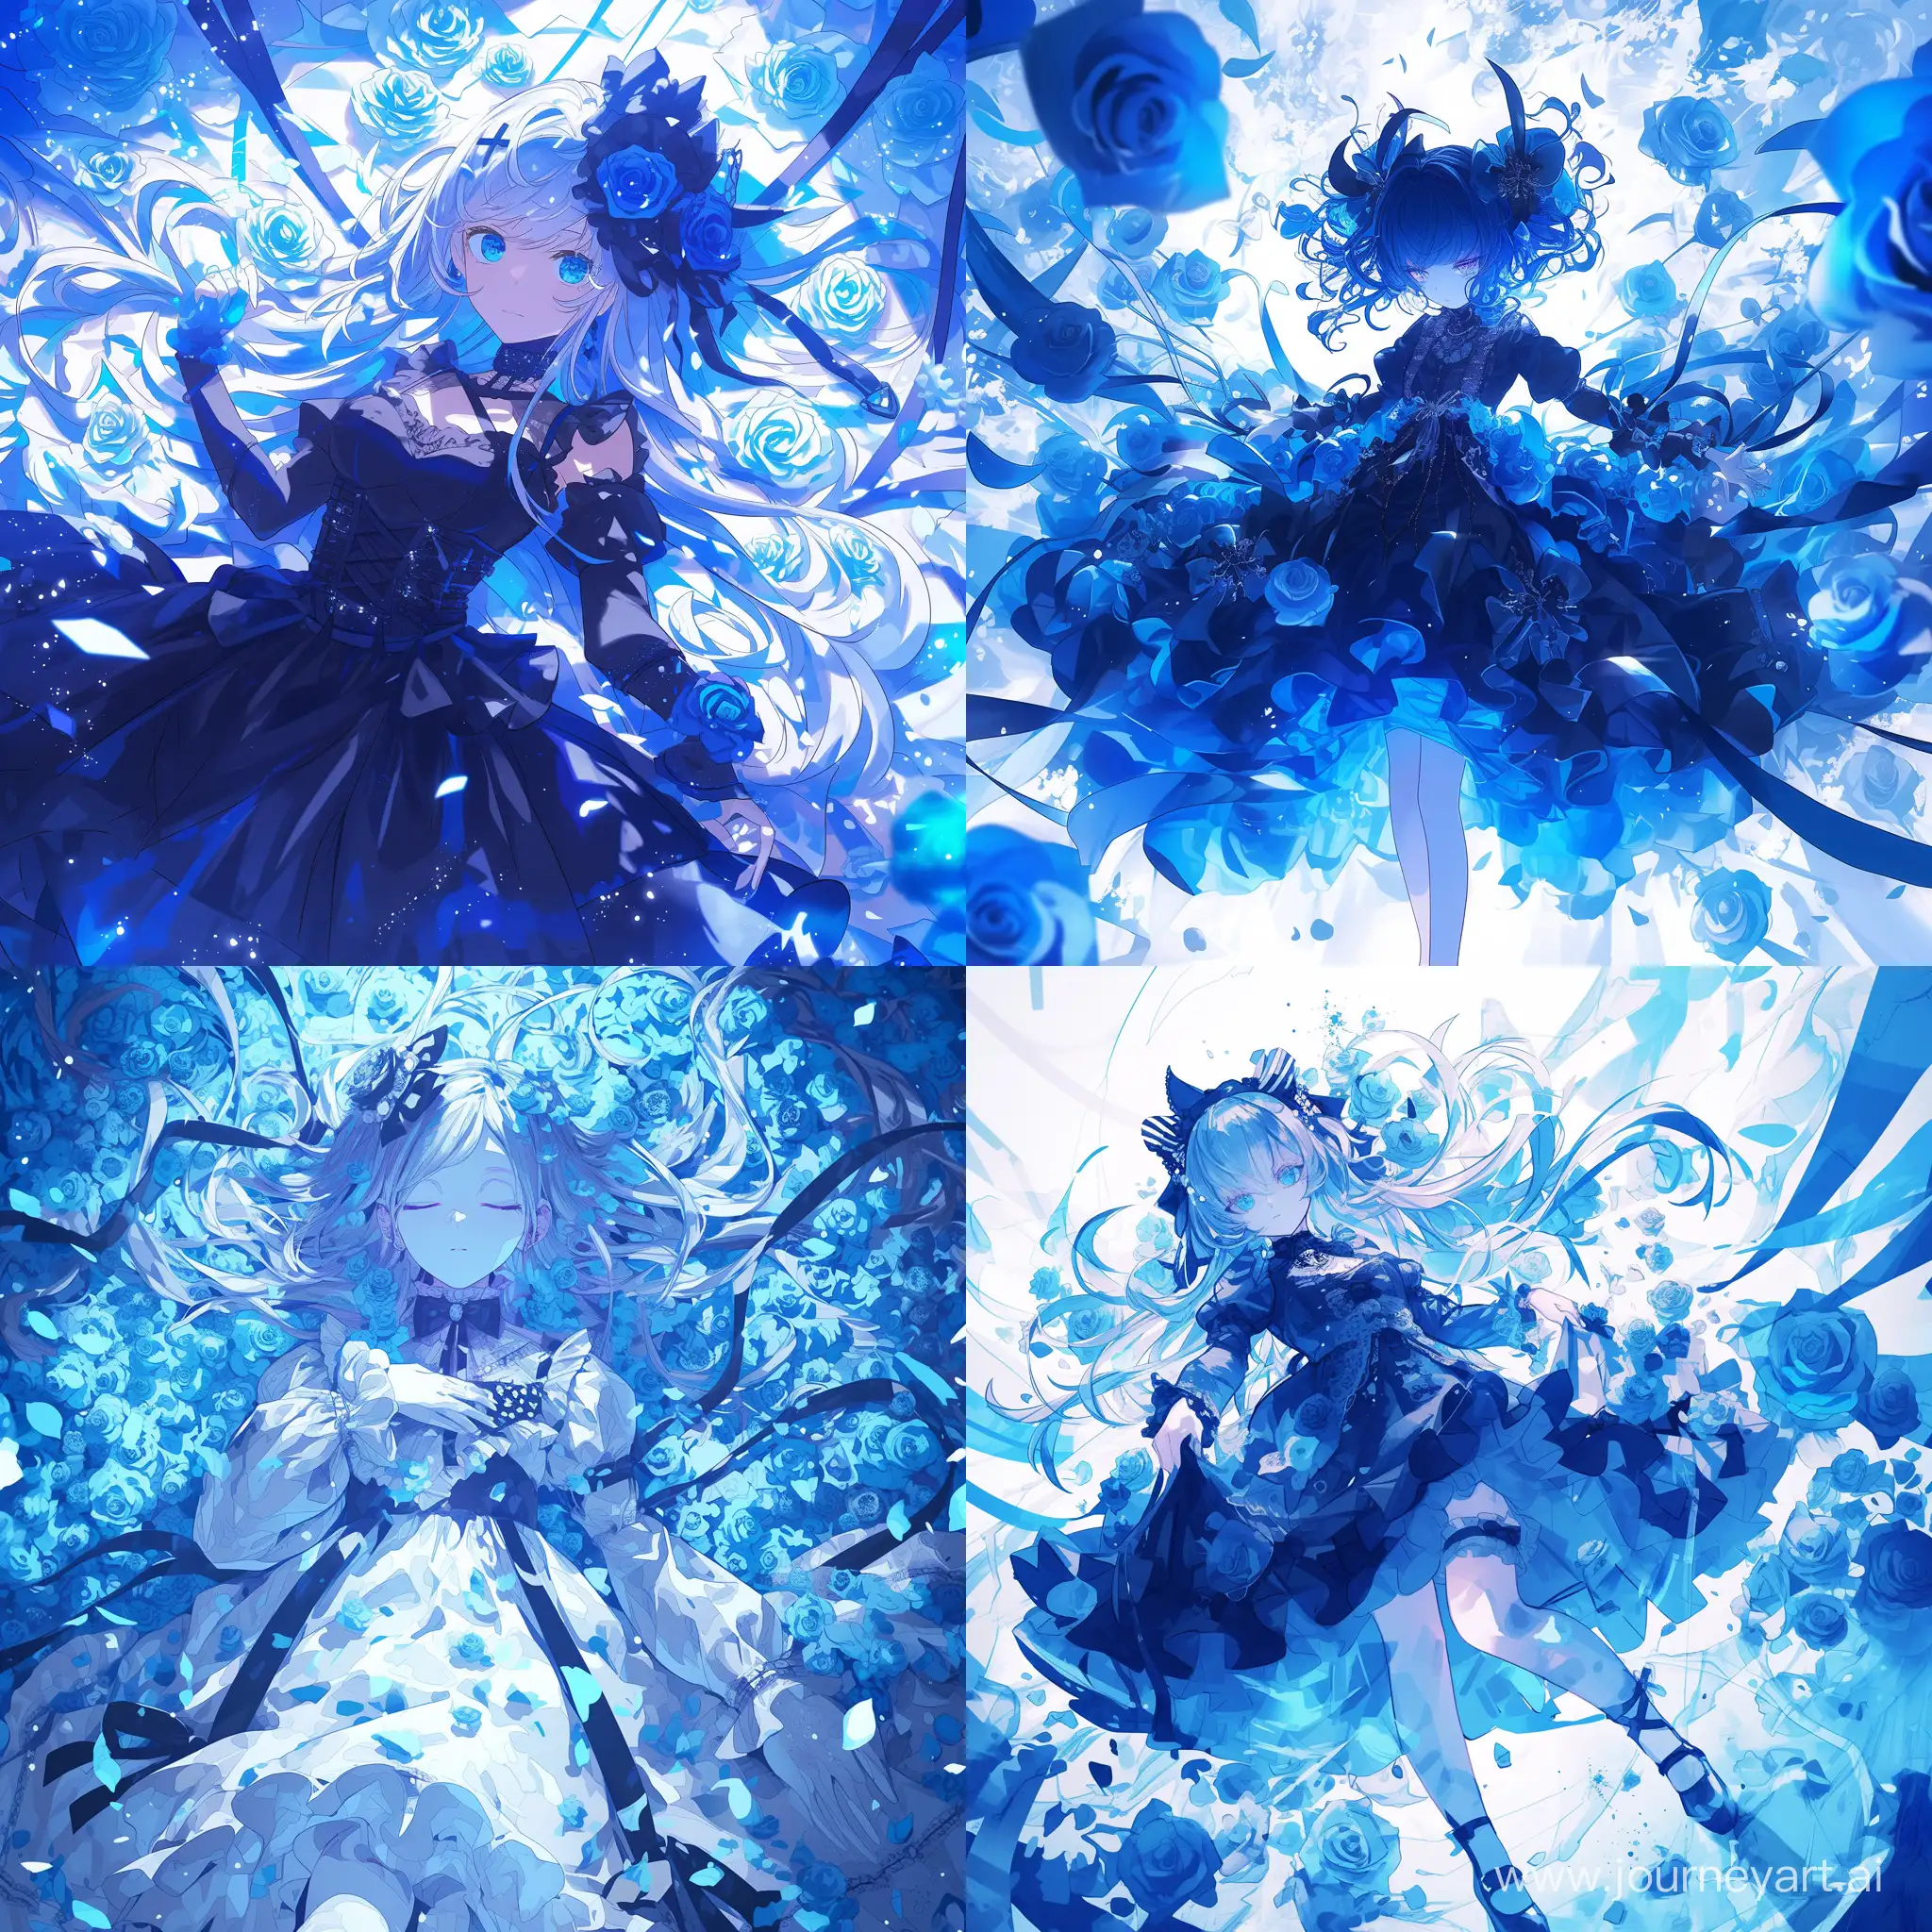 Goth-Lolia-Anime-Girl-Surrounded-by-Blue-and-White-Illustrated-Roses